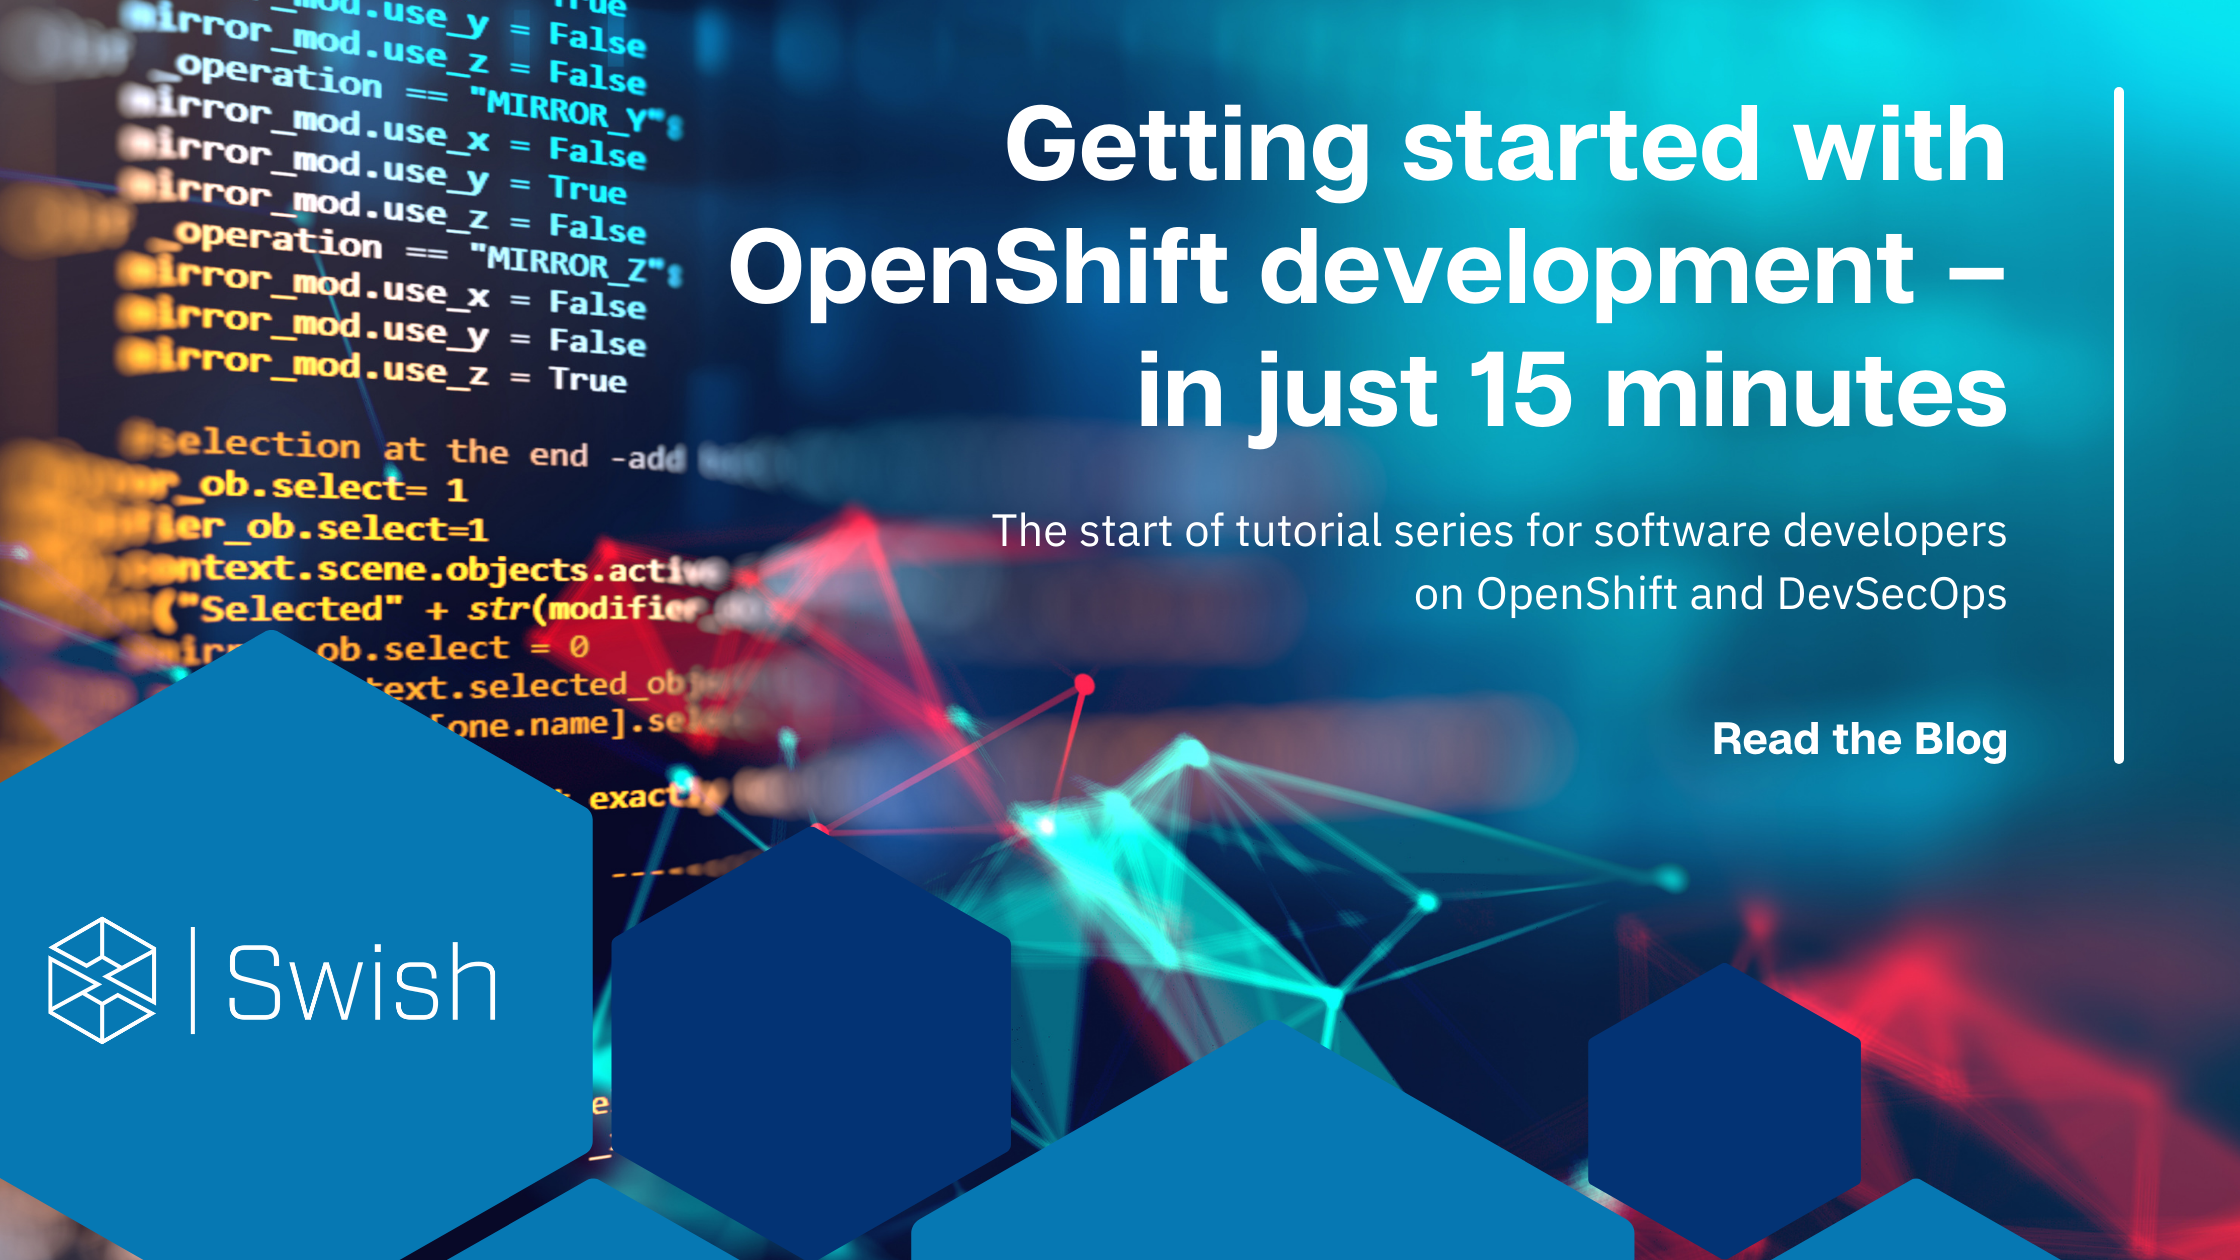 Getting started with OpenShift development - in just 15 minutes